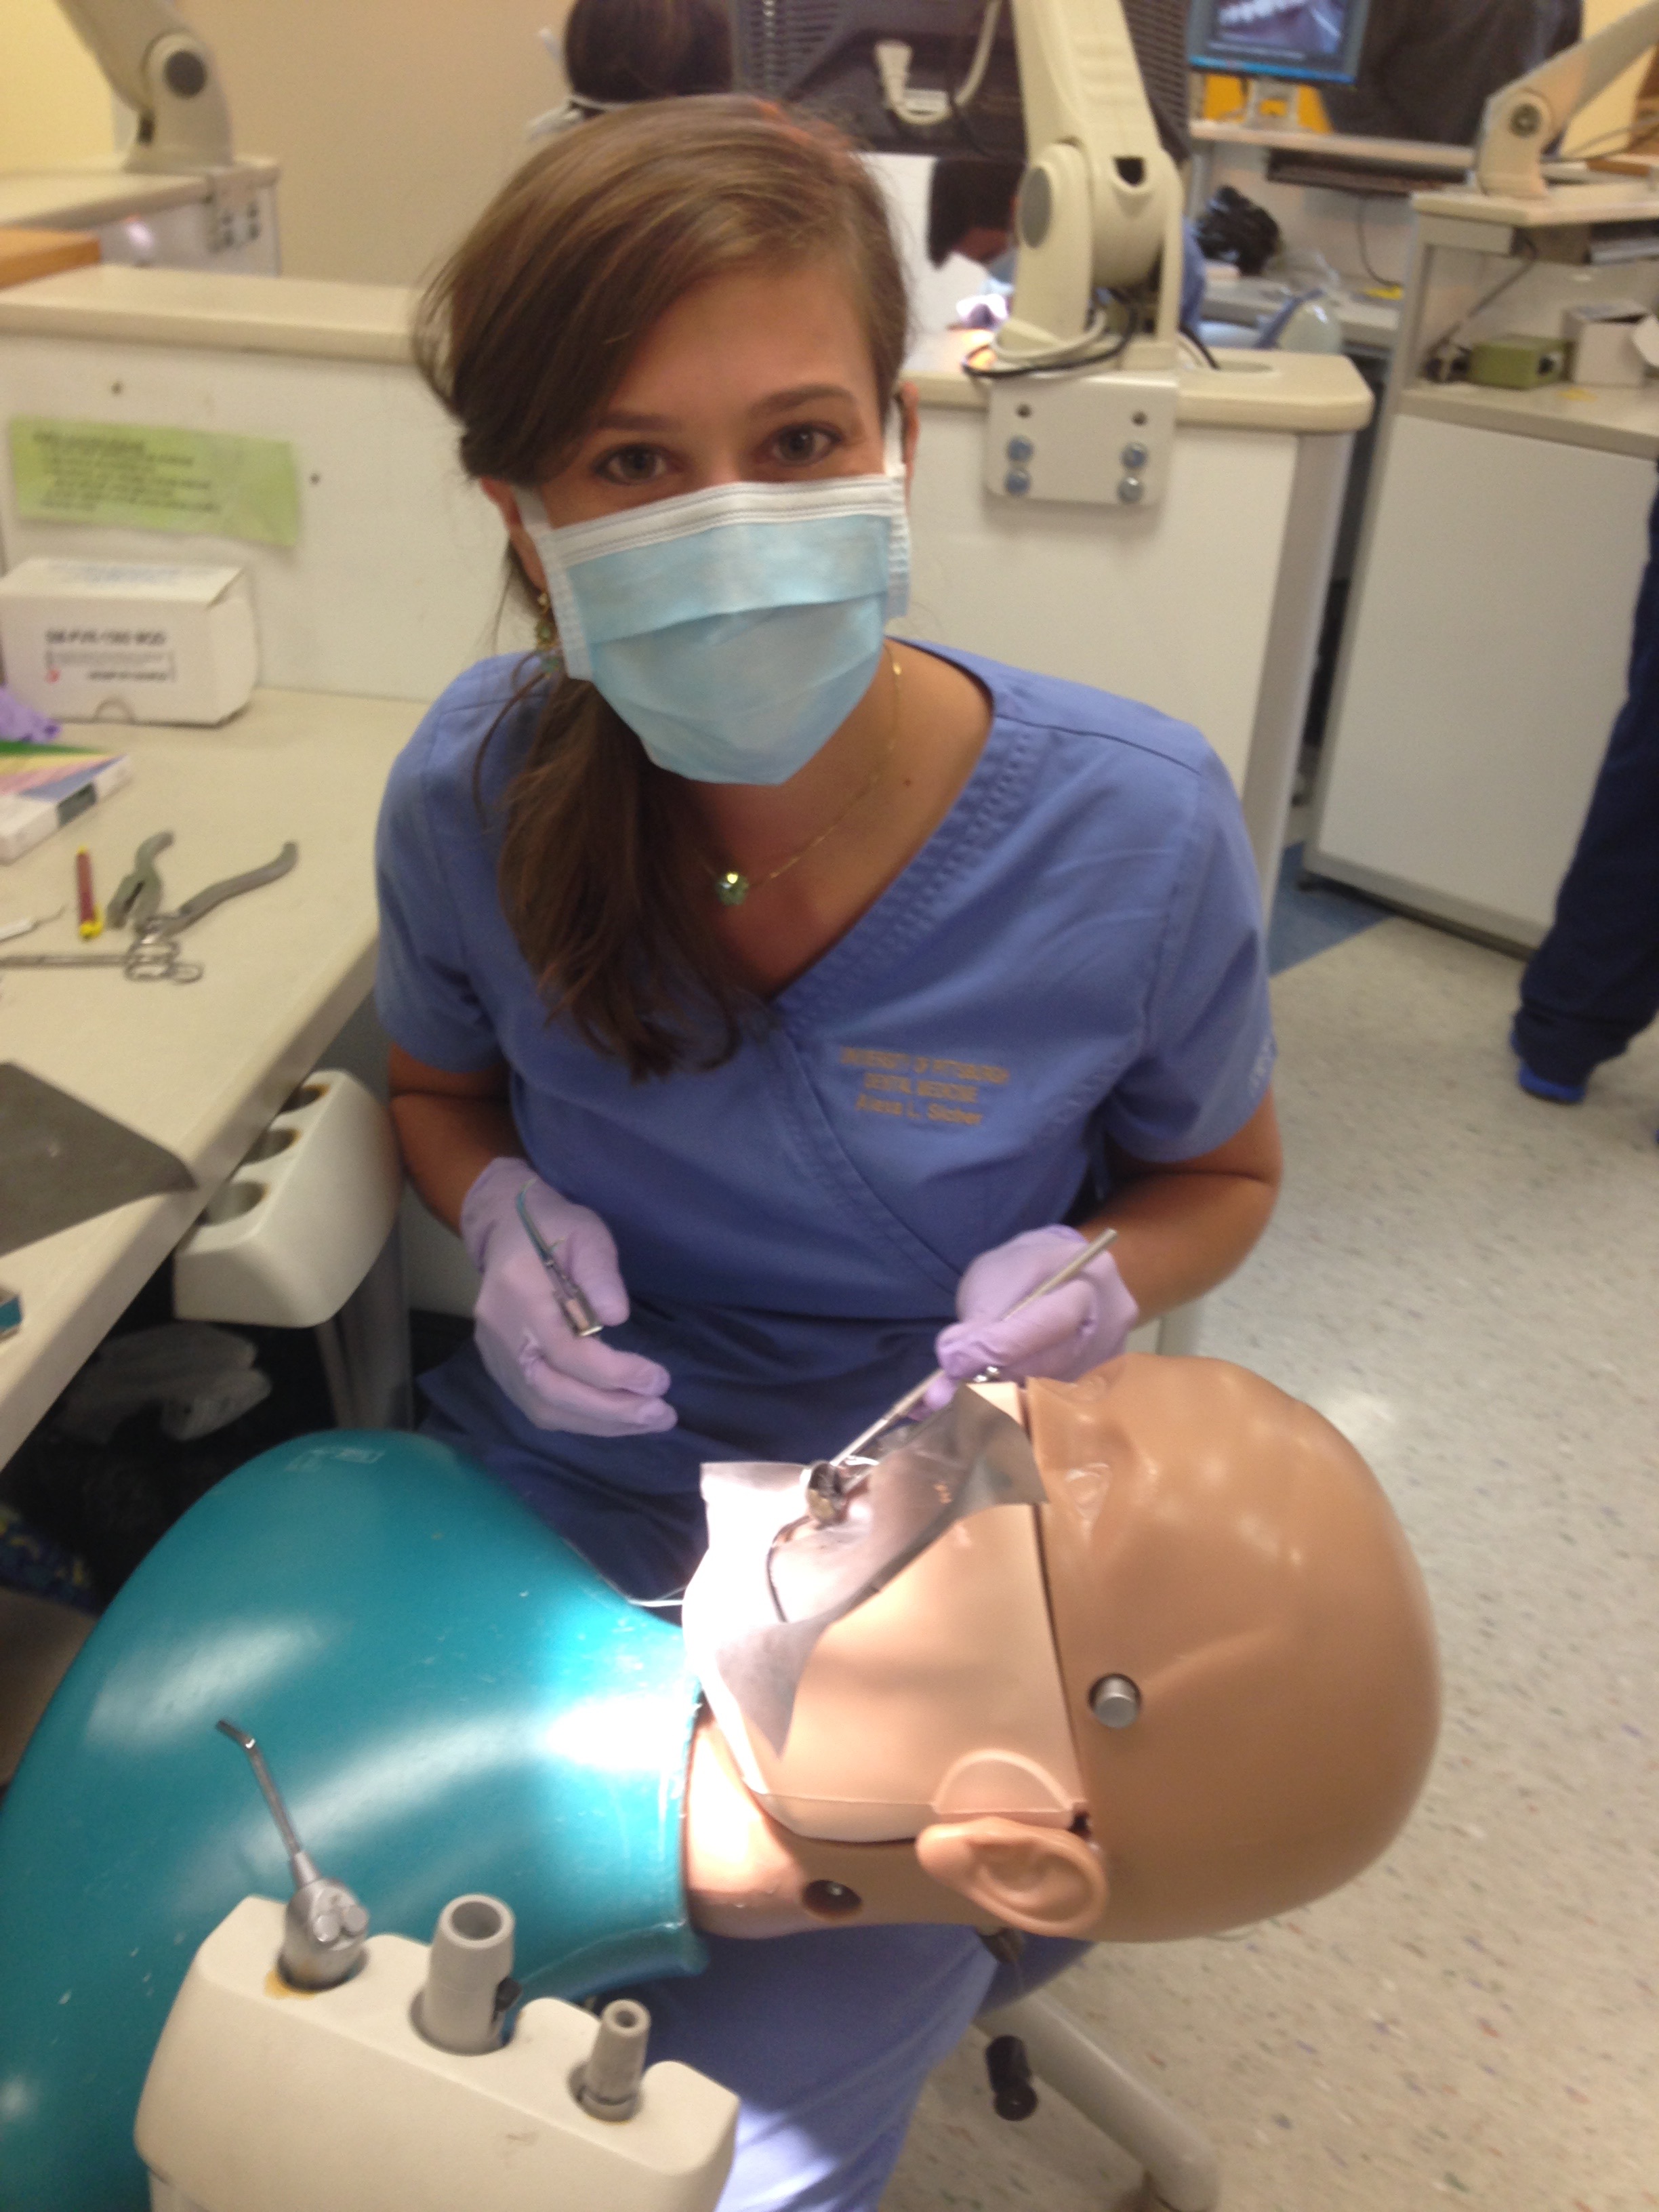 Female student in scrubs performing a practice operation on the face of a dummy.